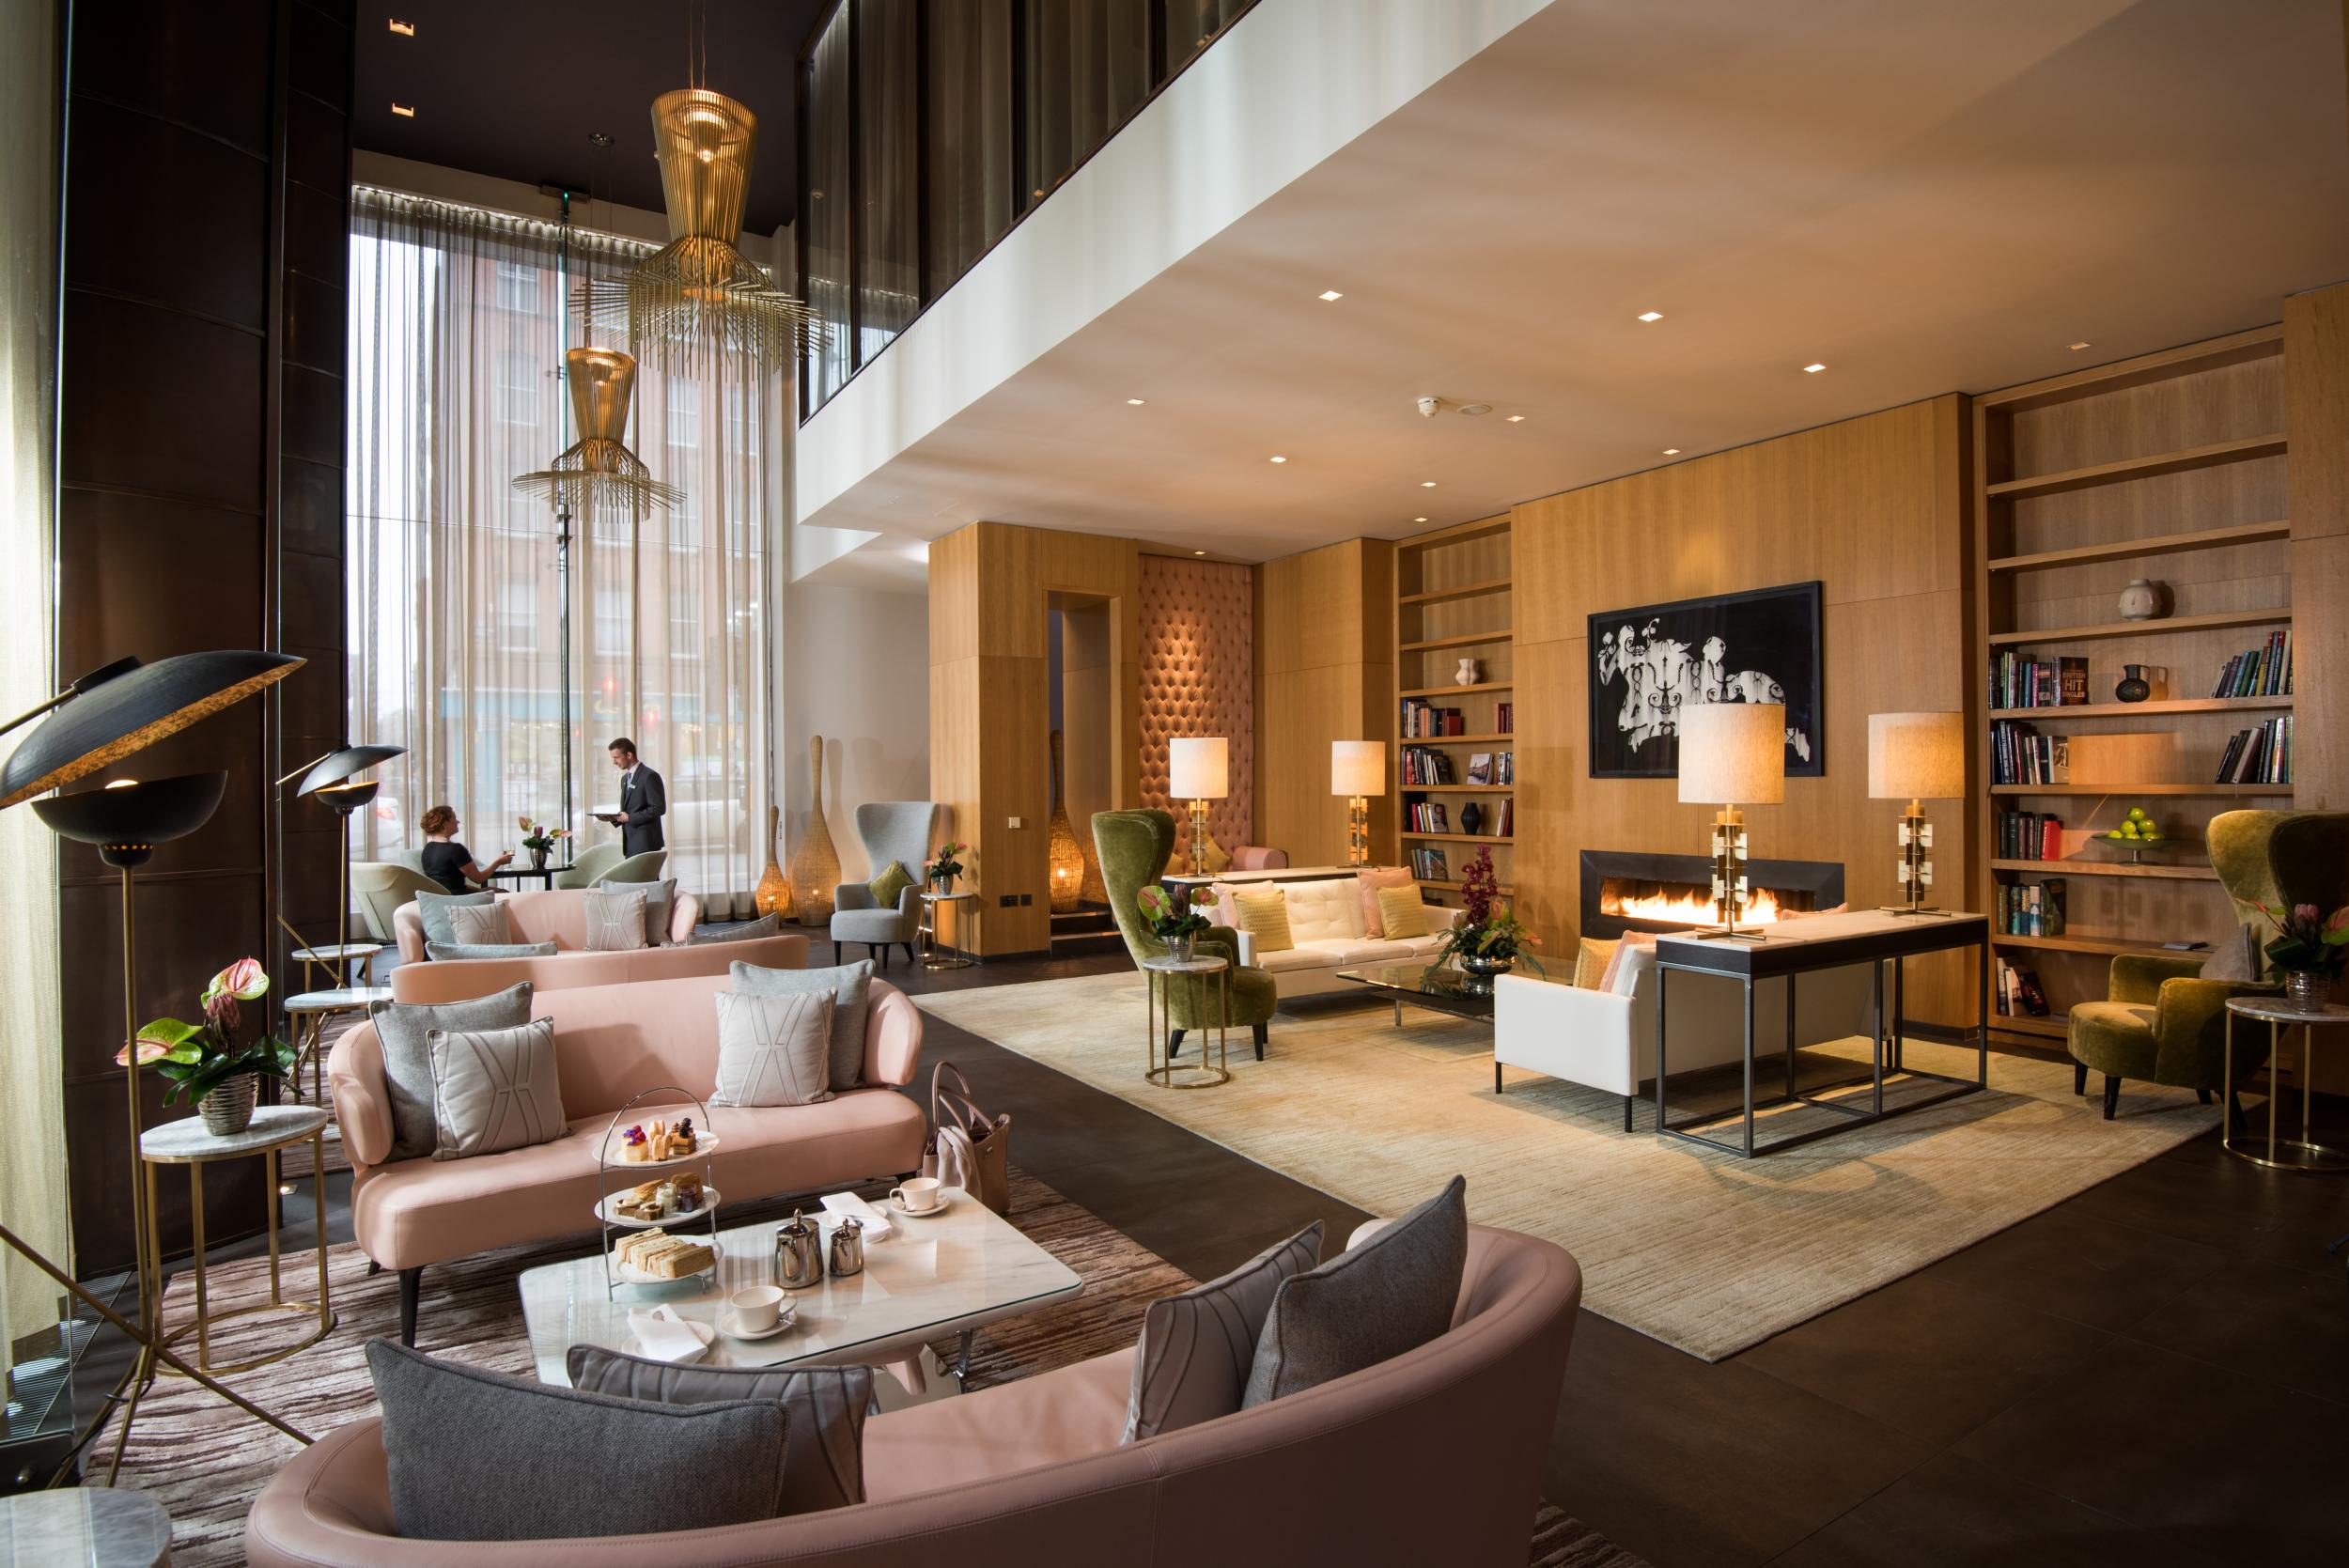 Shelter from the cold in the cosy confines of The Fitzwilliam's lobby